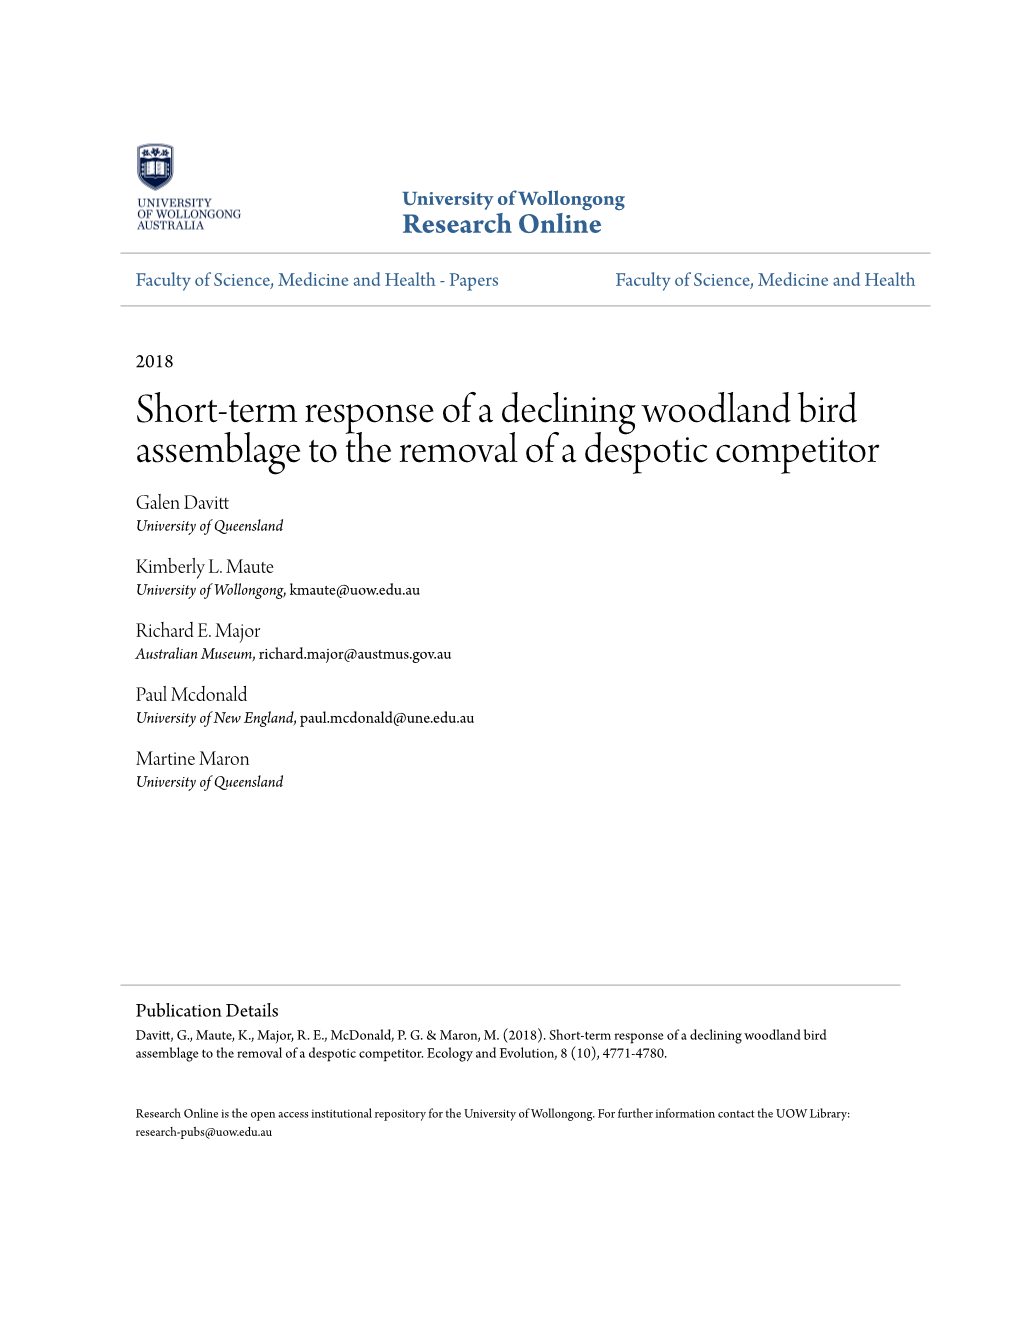 Short-Term Response of a Declining Woodland Bird Assemblage to the Removal of a Despotic Competitor Galen Davitt University of Queensland